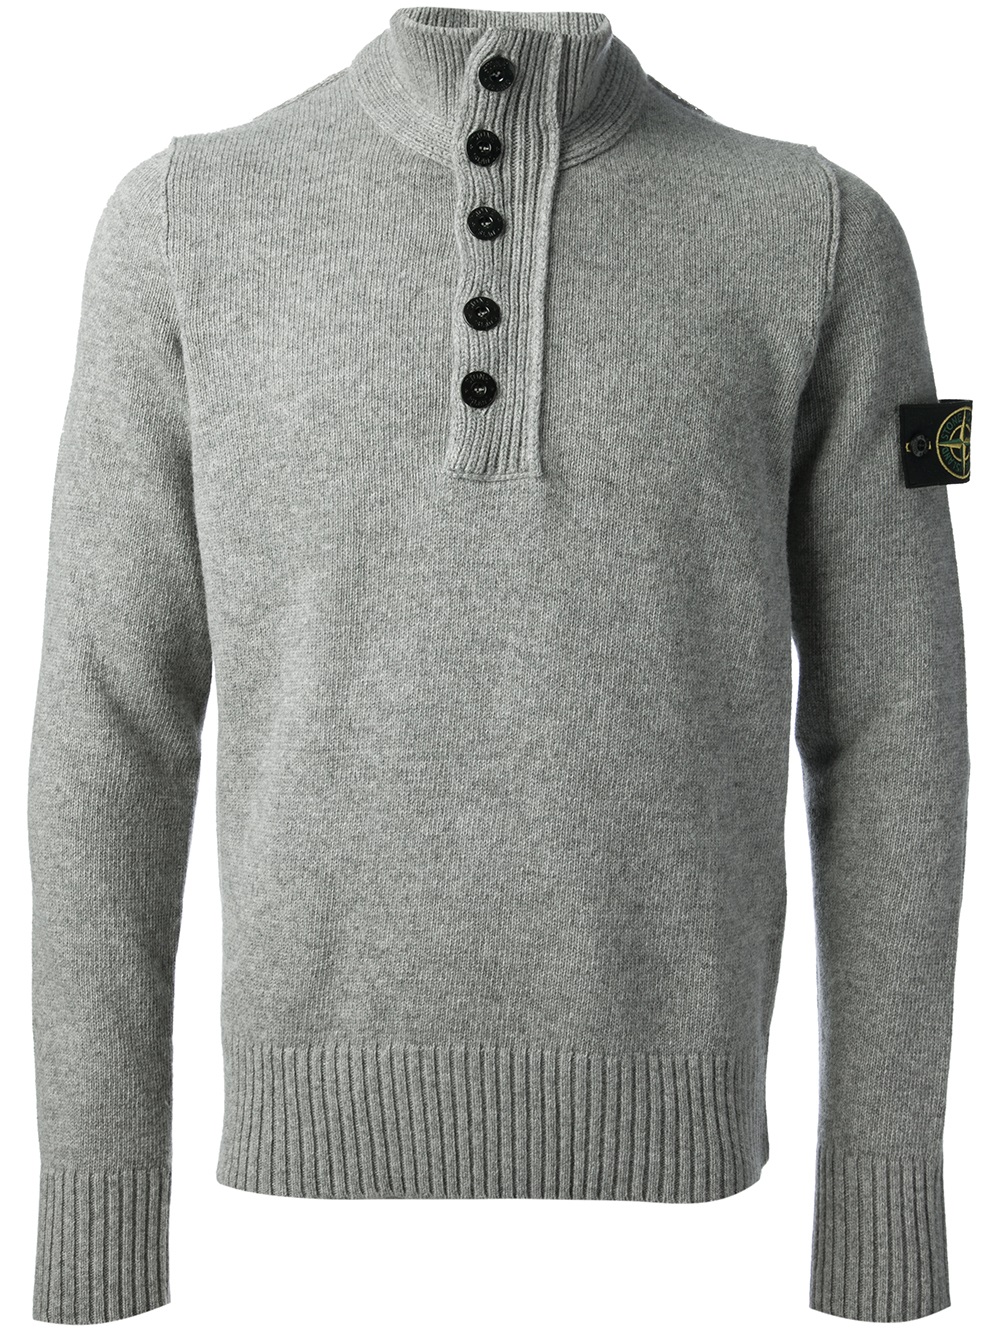 Stone island Button Down Sweater in Gray for Men | Lyst